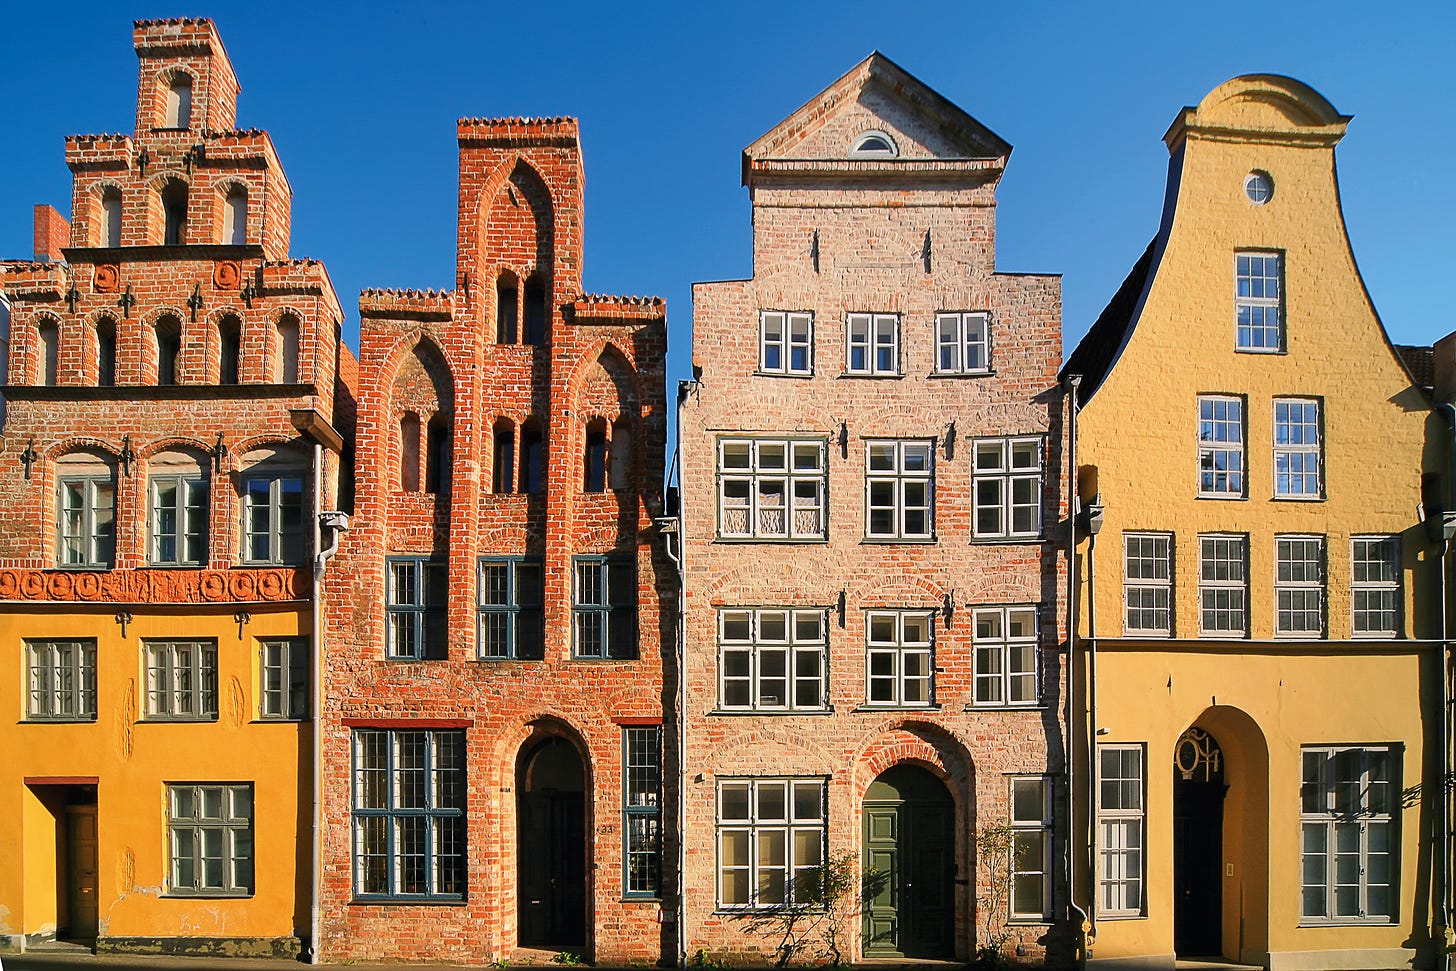 A row of four very old, tall, gabled houses in reds and yellows